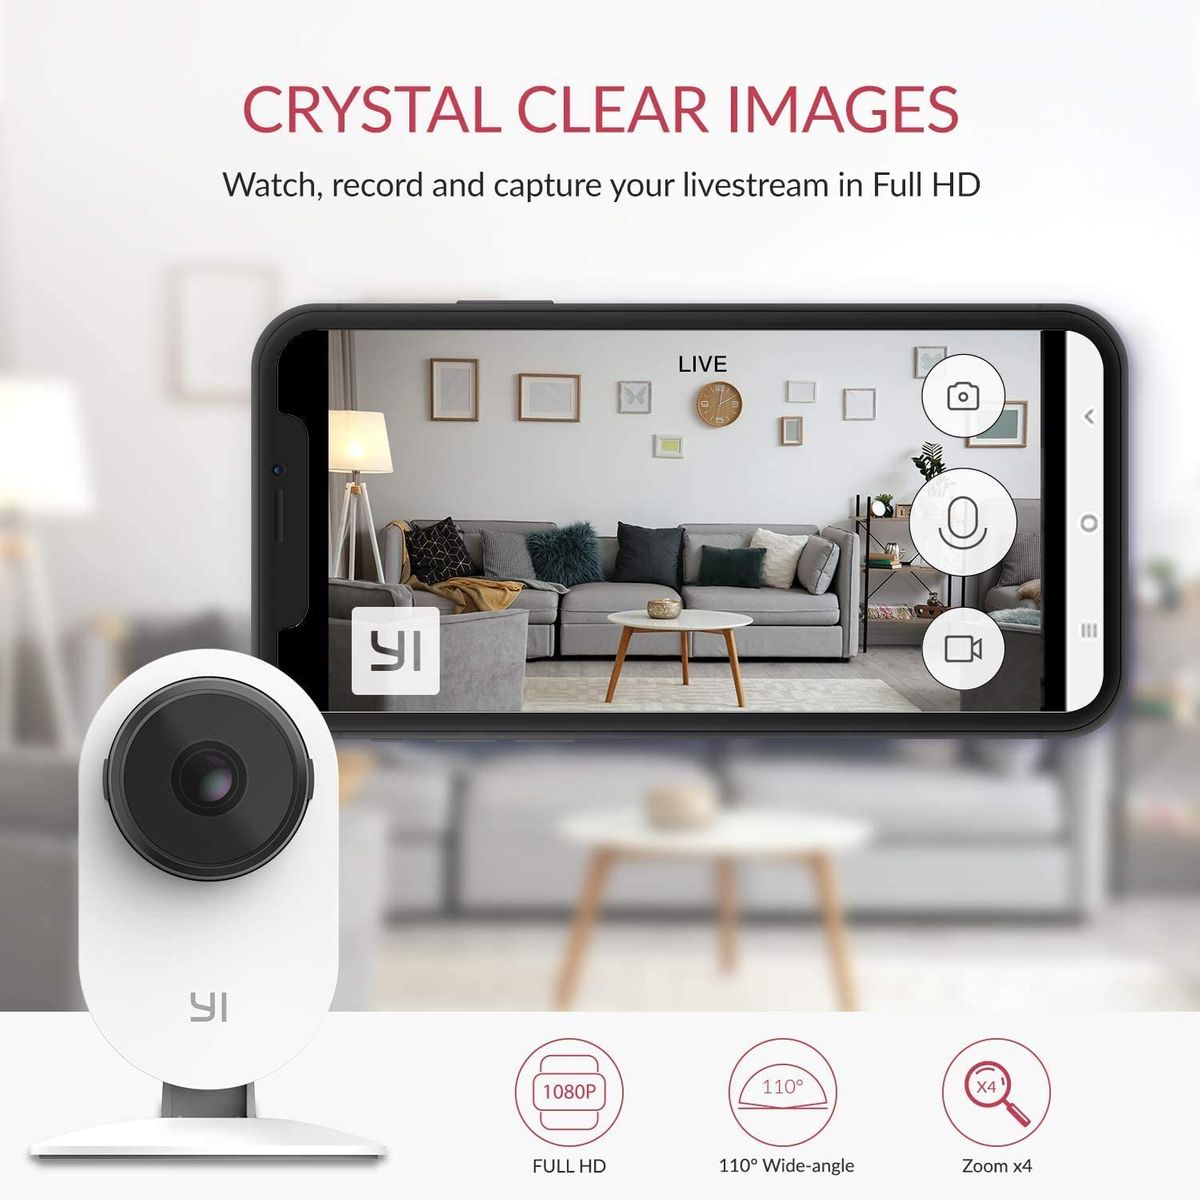 YI Home 1080P IP Camera 3 Surveillance Camera Full HD with AI Function